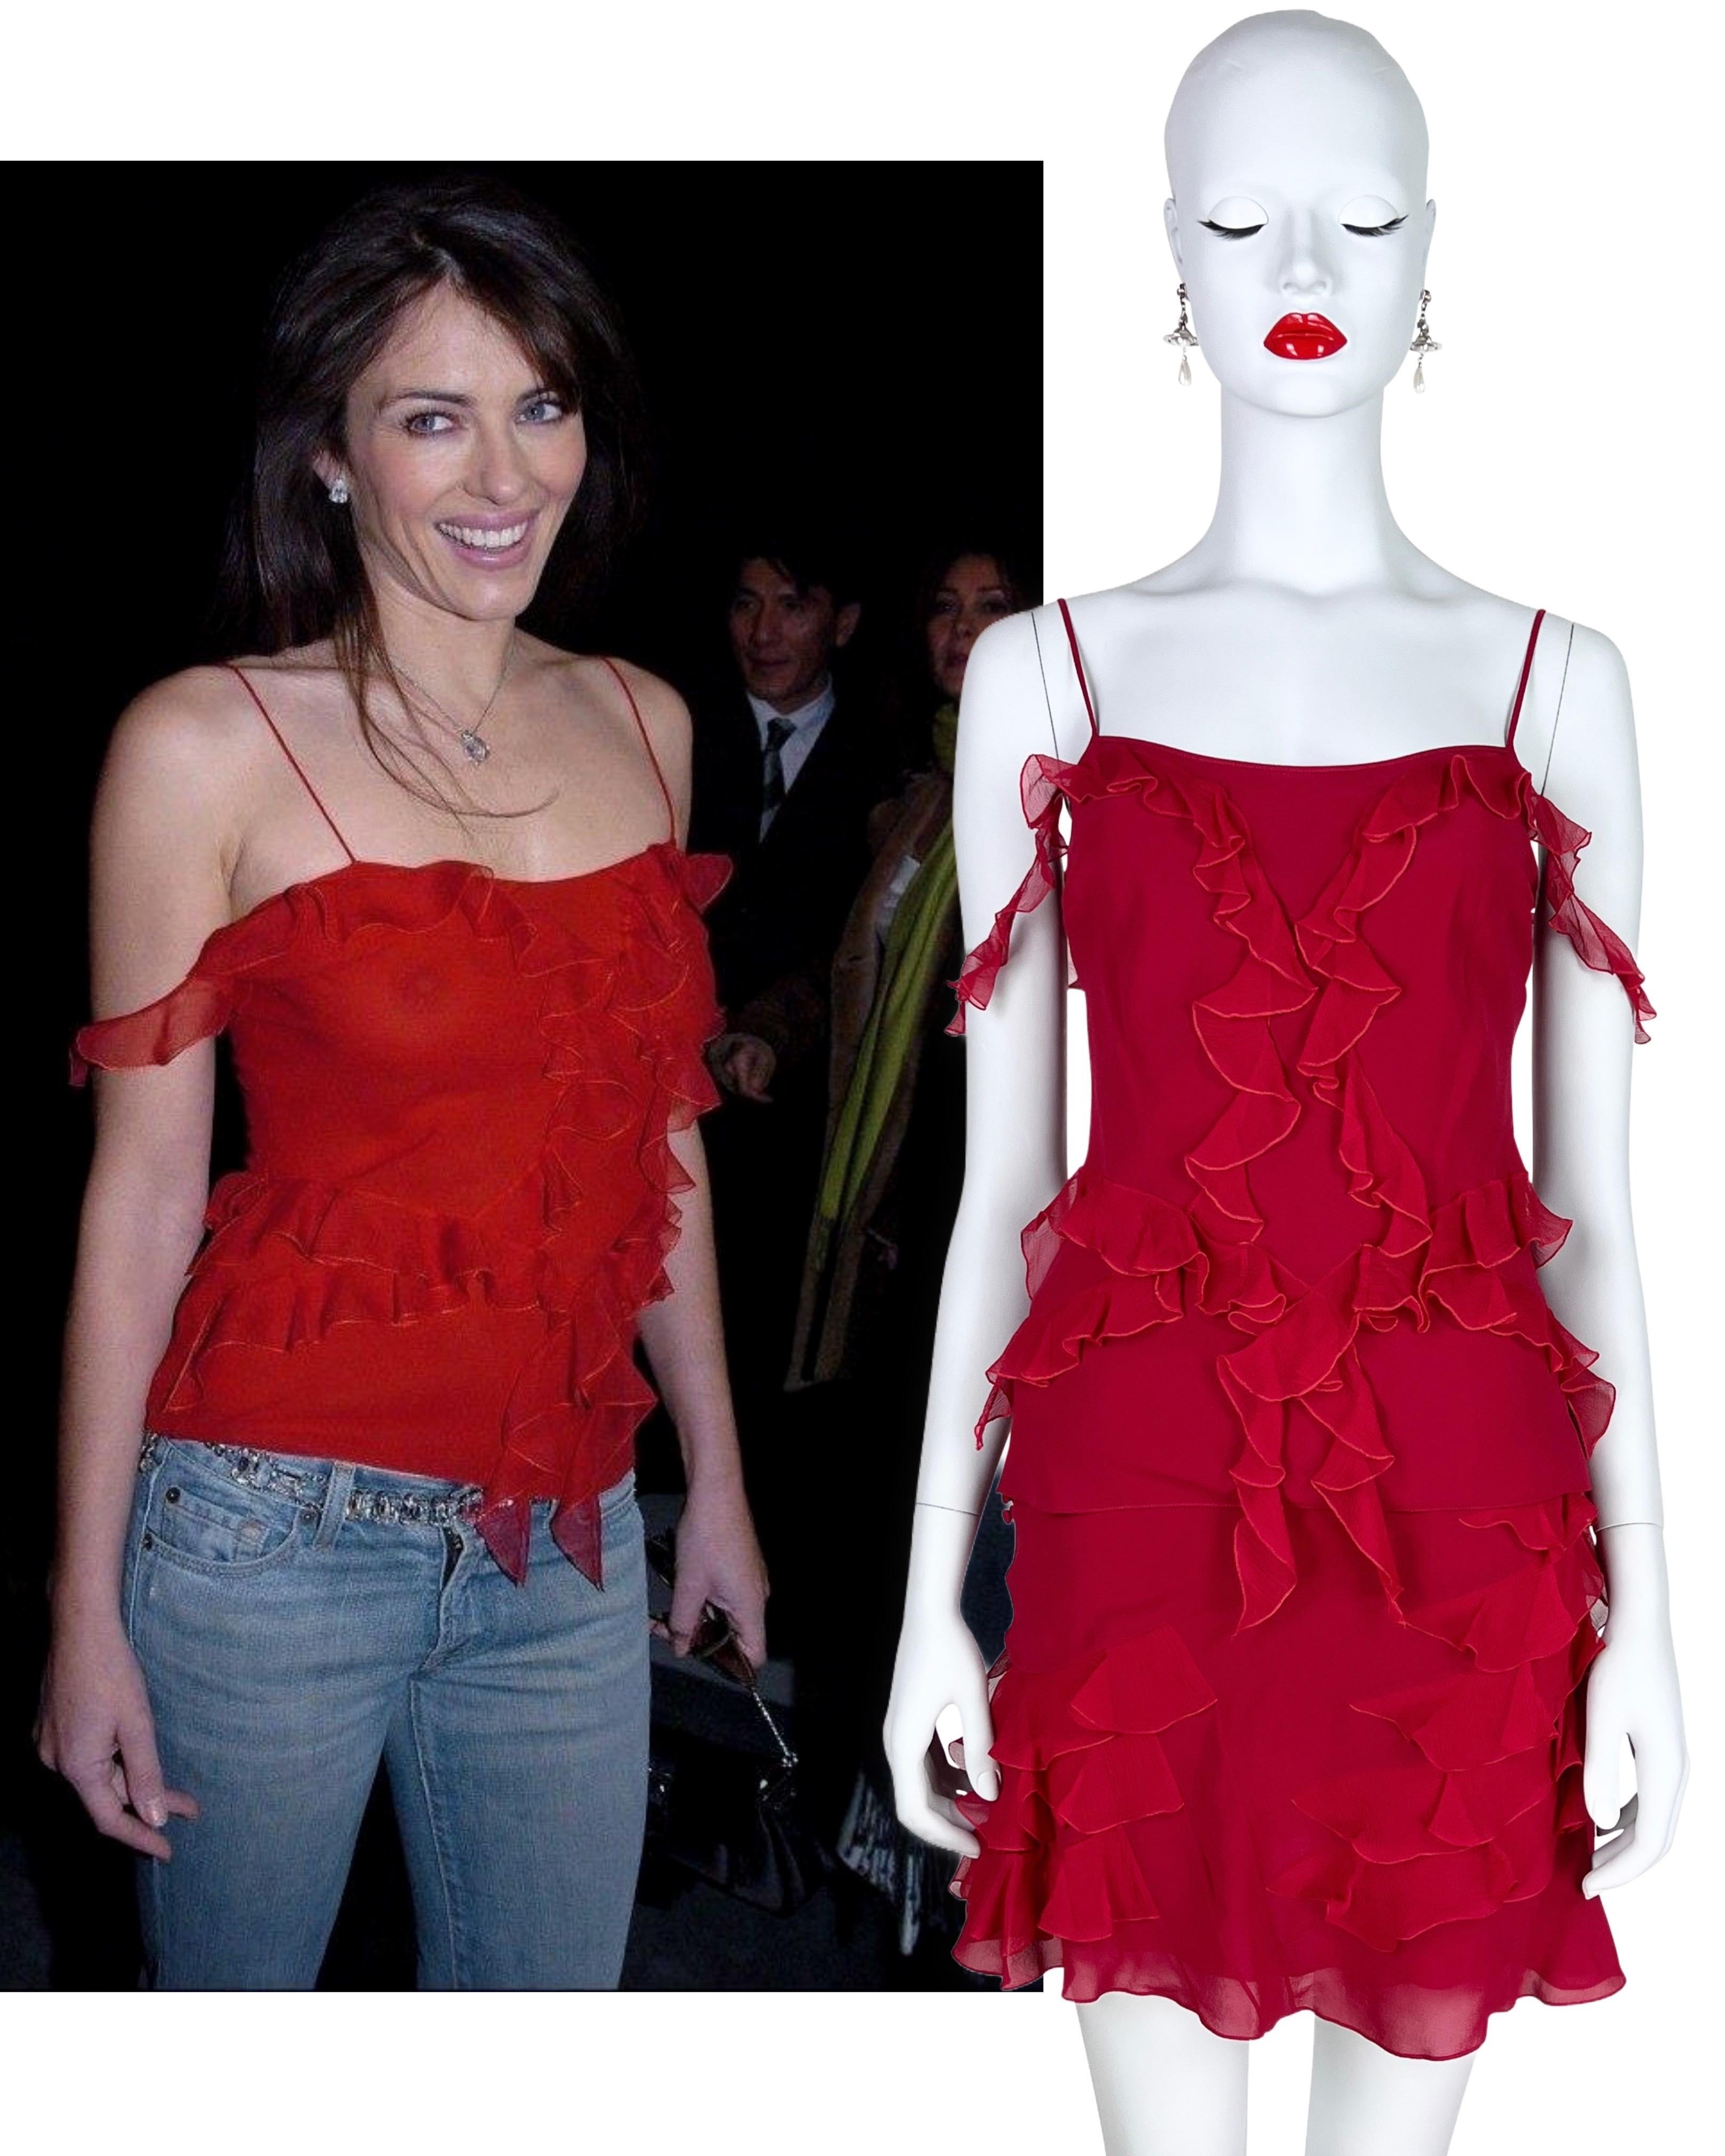 From QV Archive:

Bias cut silk crepe chiffon
A John Galliano signature row of silk buttons on the skirt
As seen on Liz Hurley attending a front row of a Dior show in 2003
Size FR 36 or US 4, fits true to size
Excellent vintage condition 